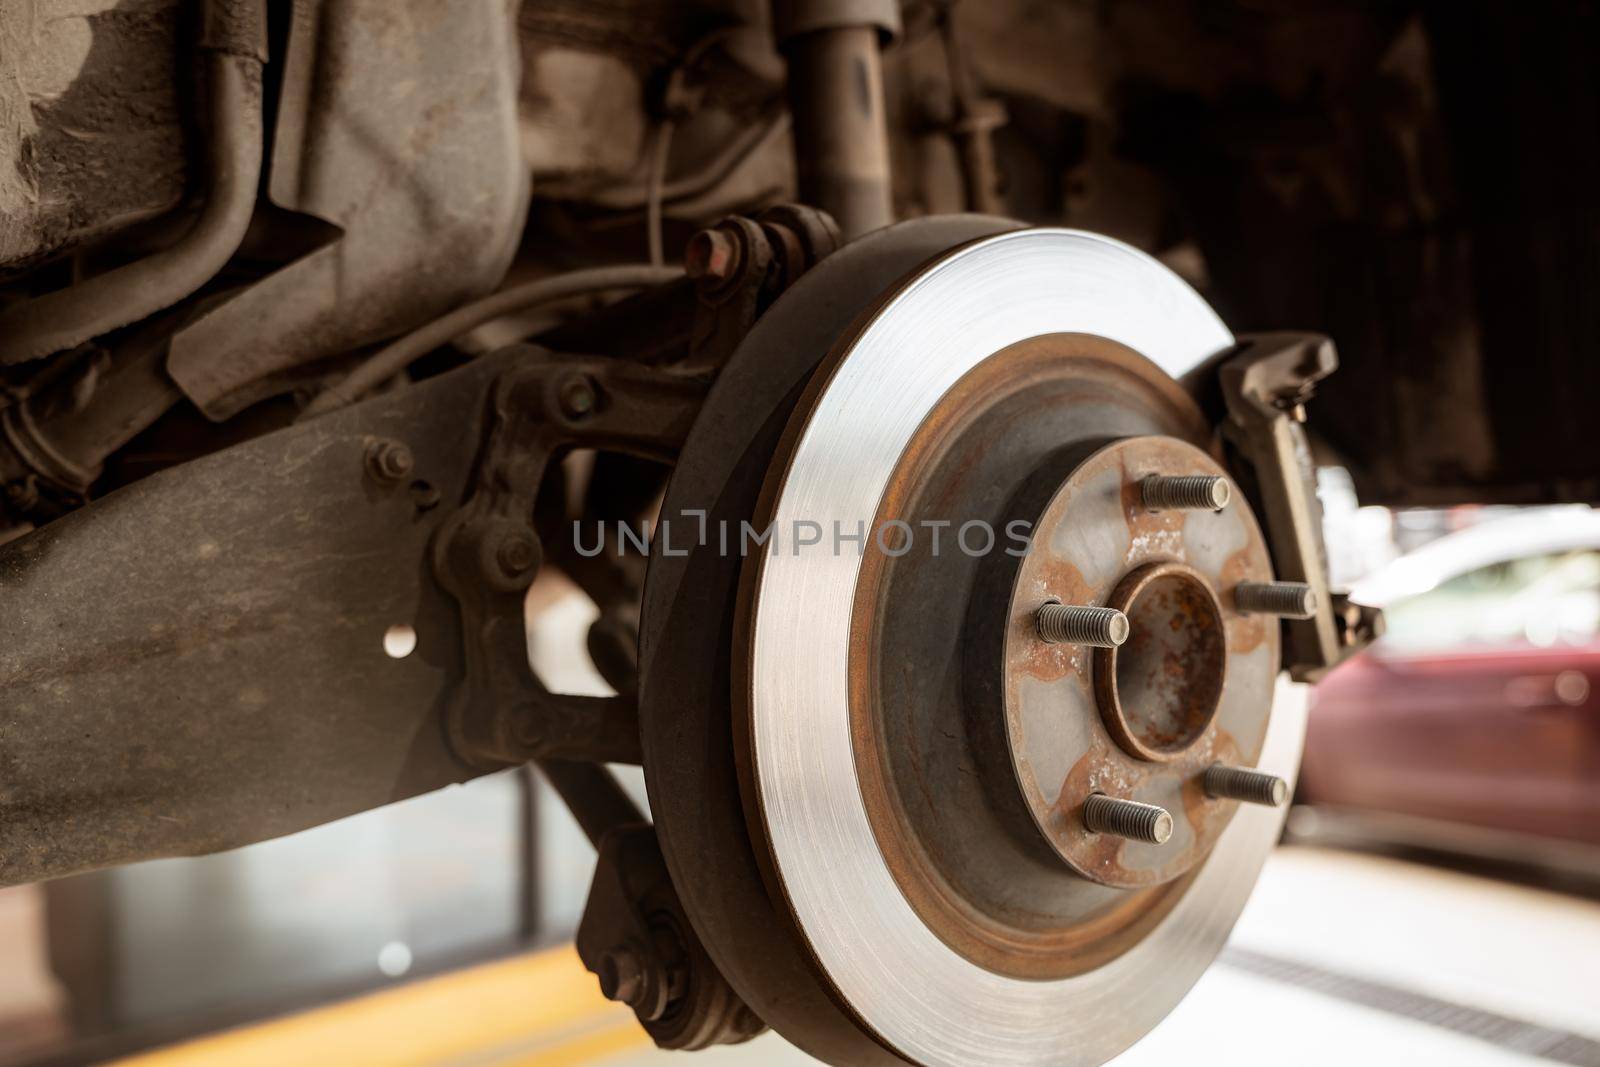 Car disc brake system. Car suspension in process of new tire replacement at garage workshop. Car disc brake mechanic check and repair. Disk break rotor. Car in change tire process at service station.